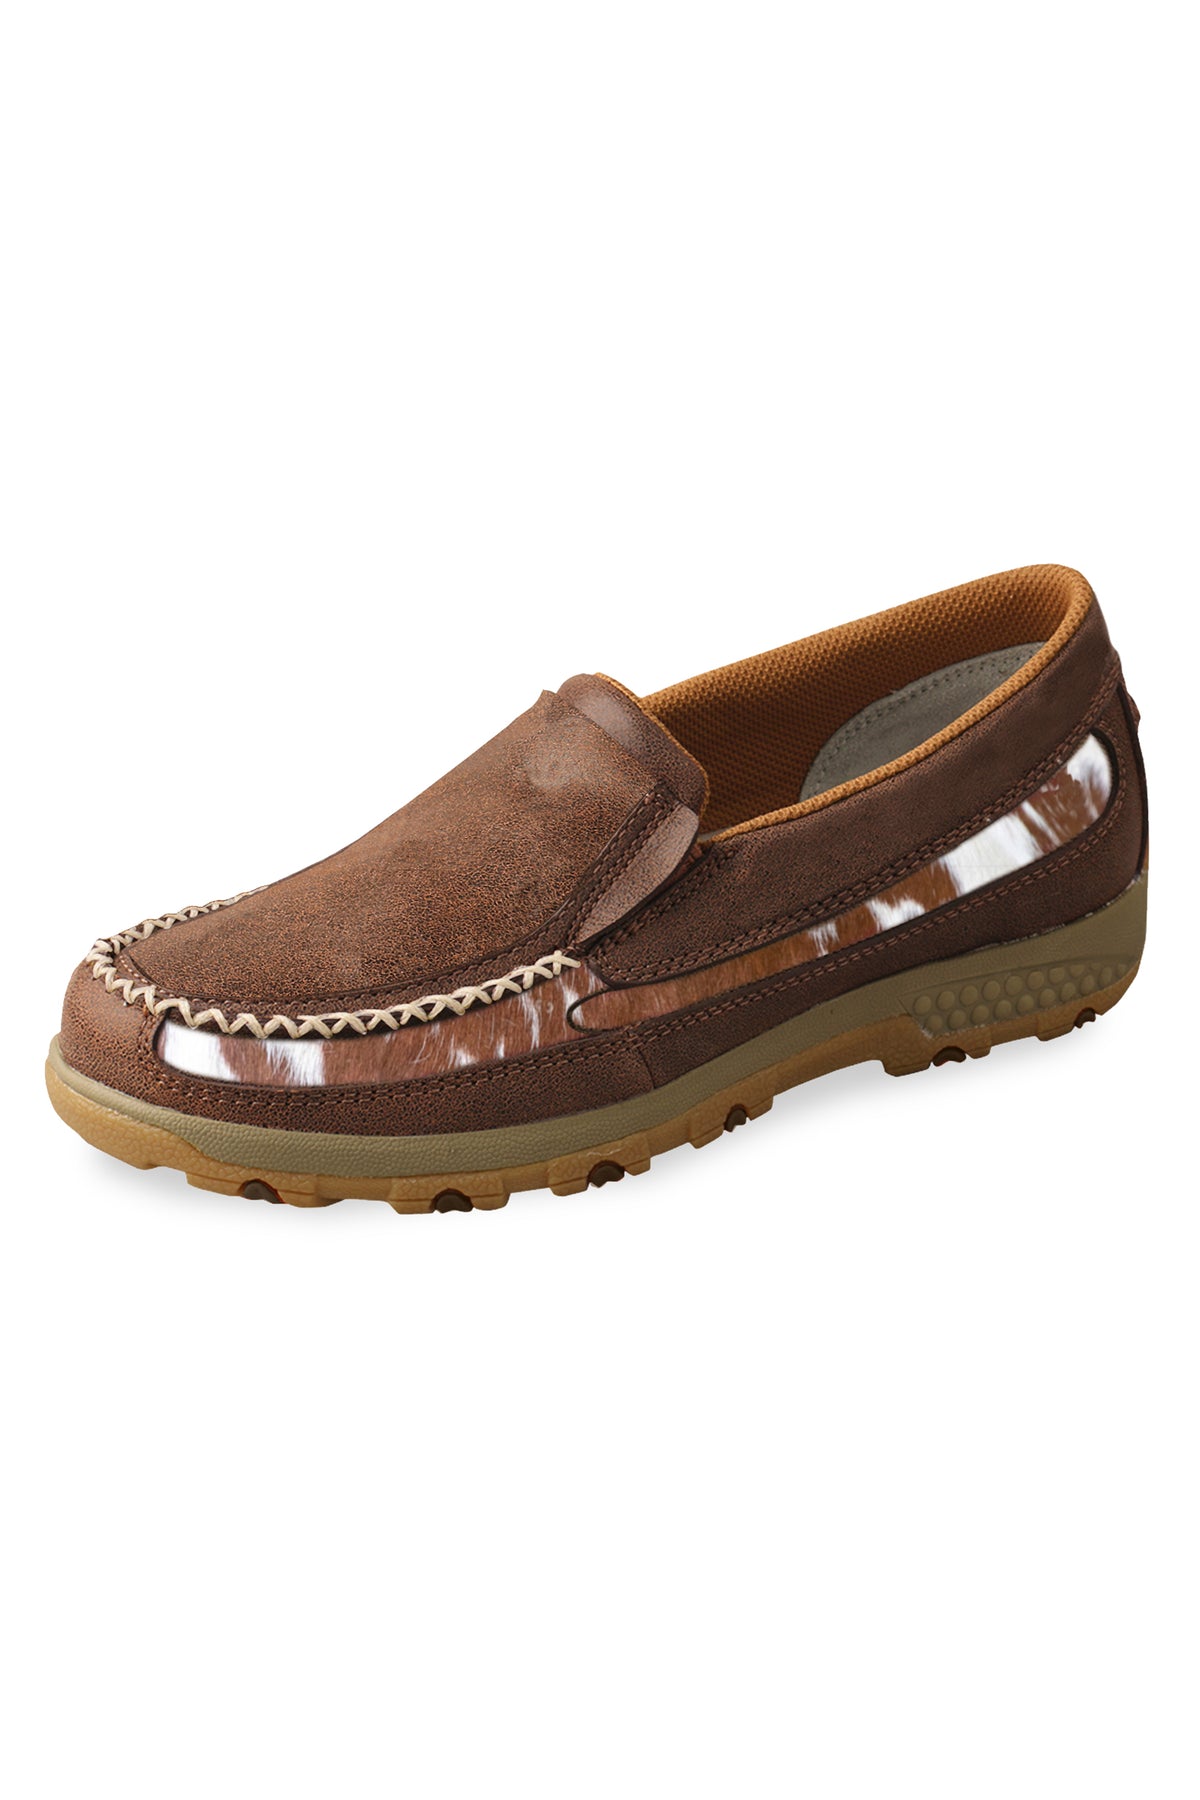 Twisted X Womens Cow Fur Moc Slip On - Brown/Brown